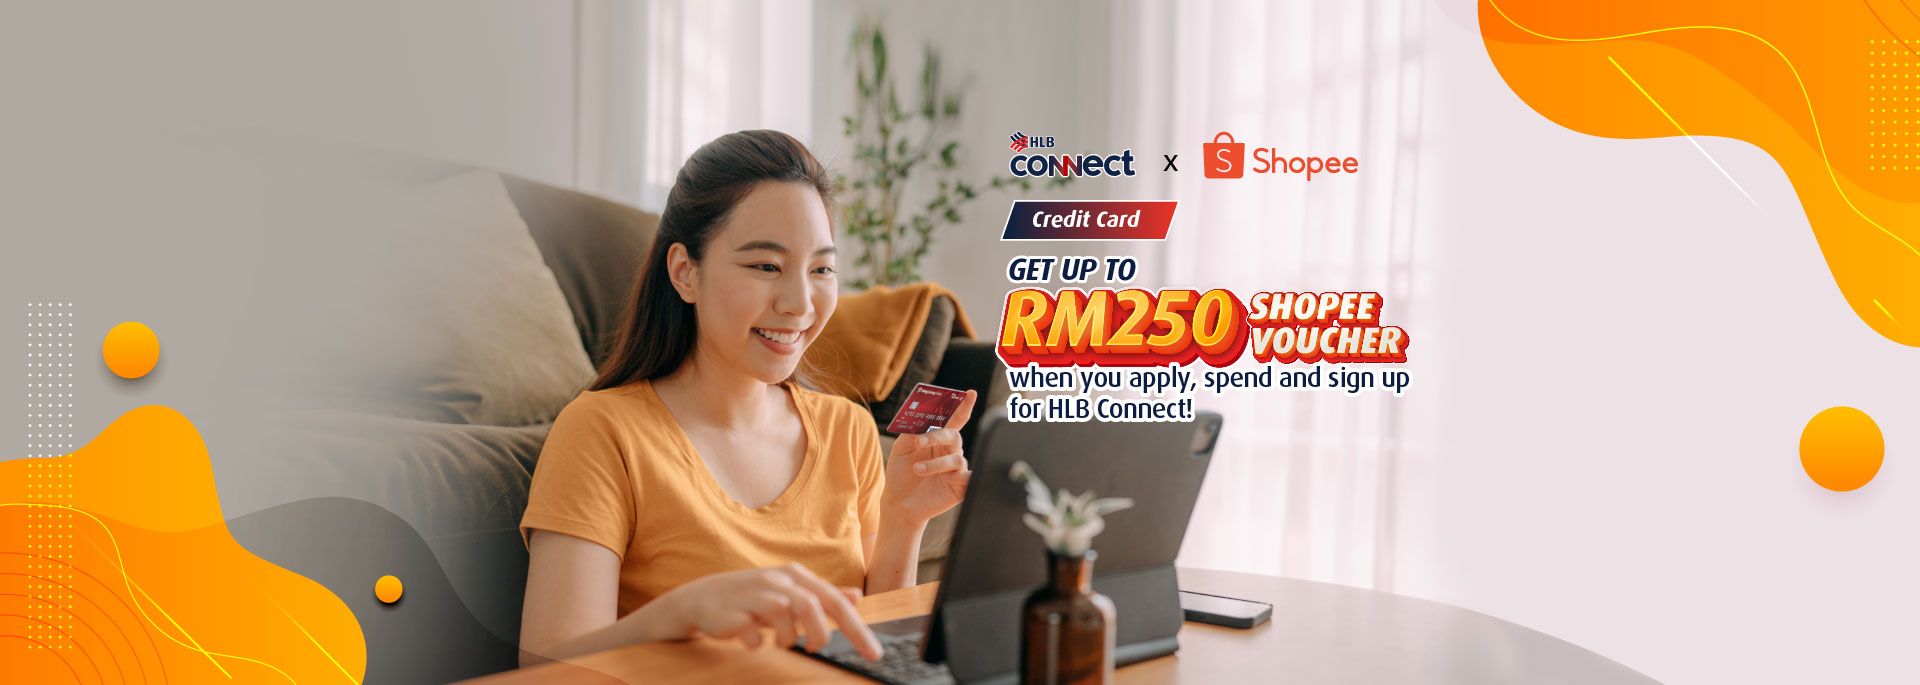 Your next purchase on Shopee could be up to RM250 OFF!